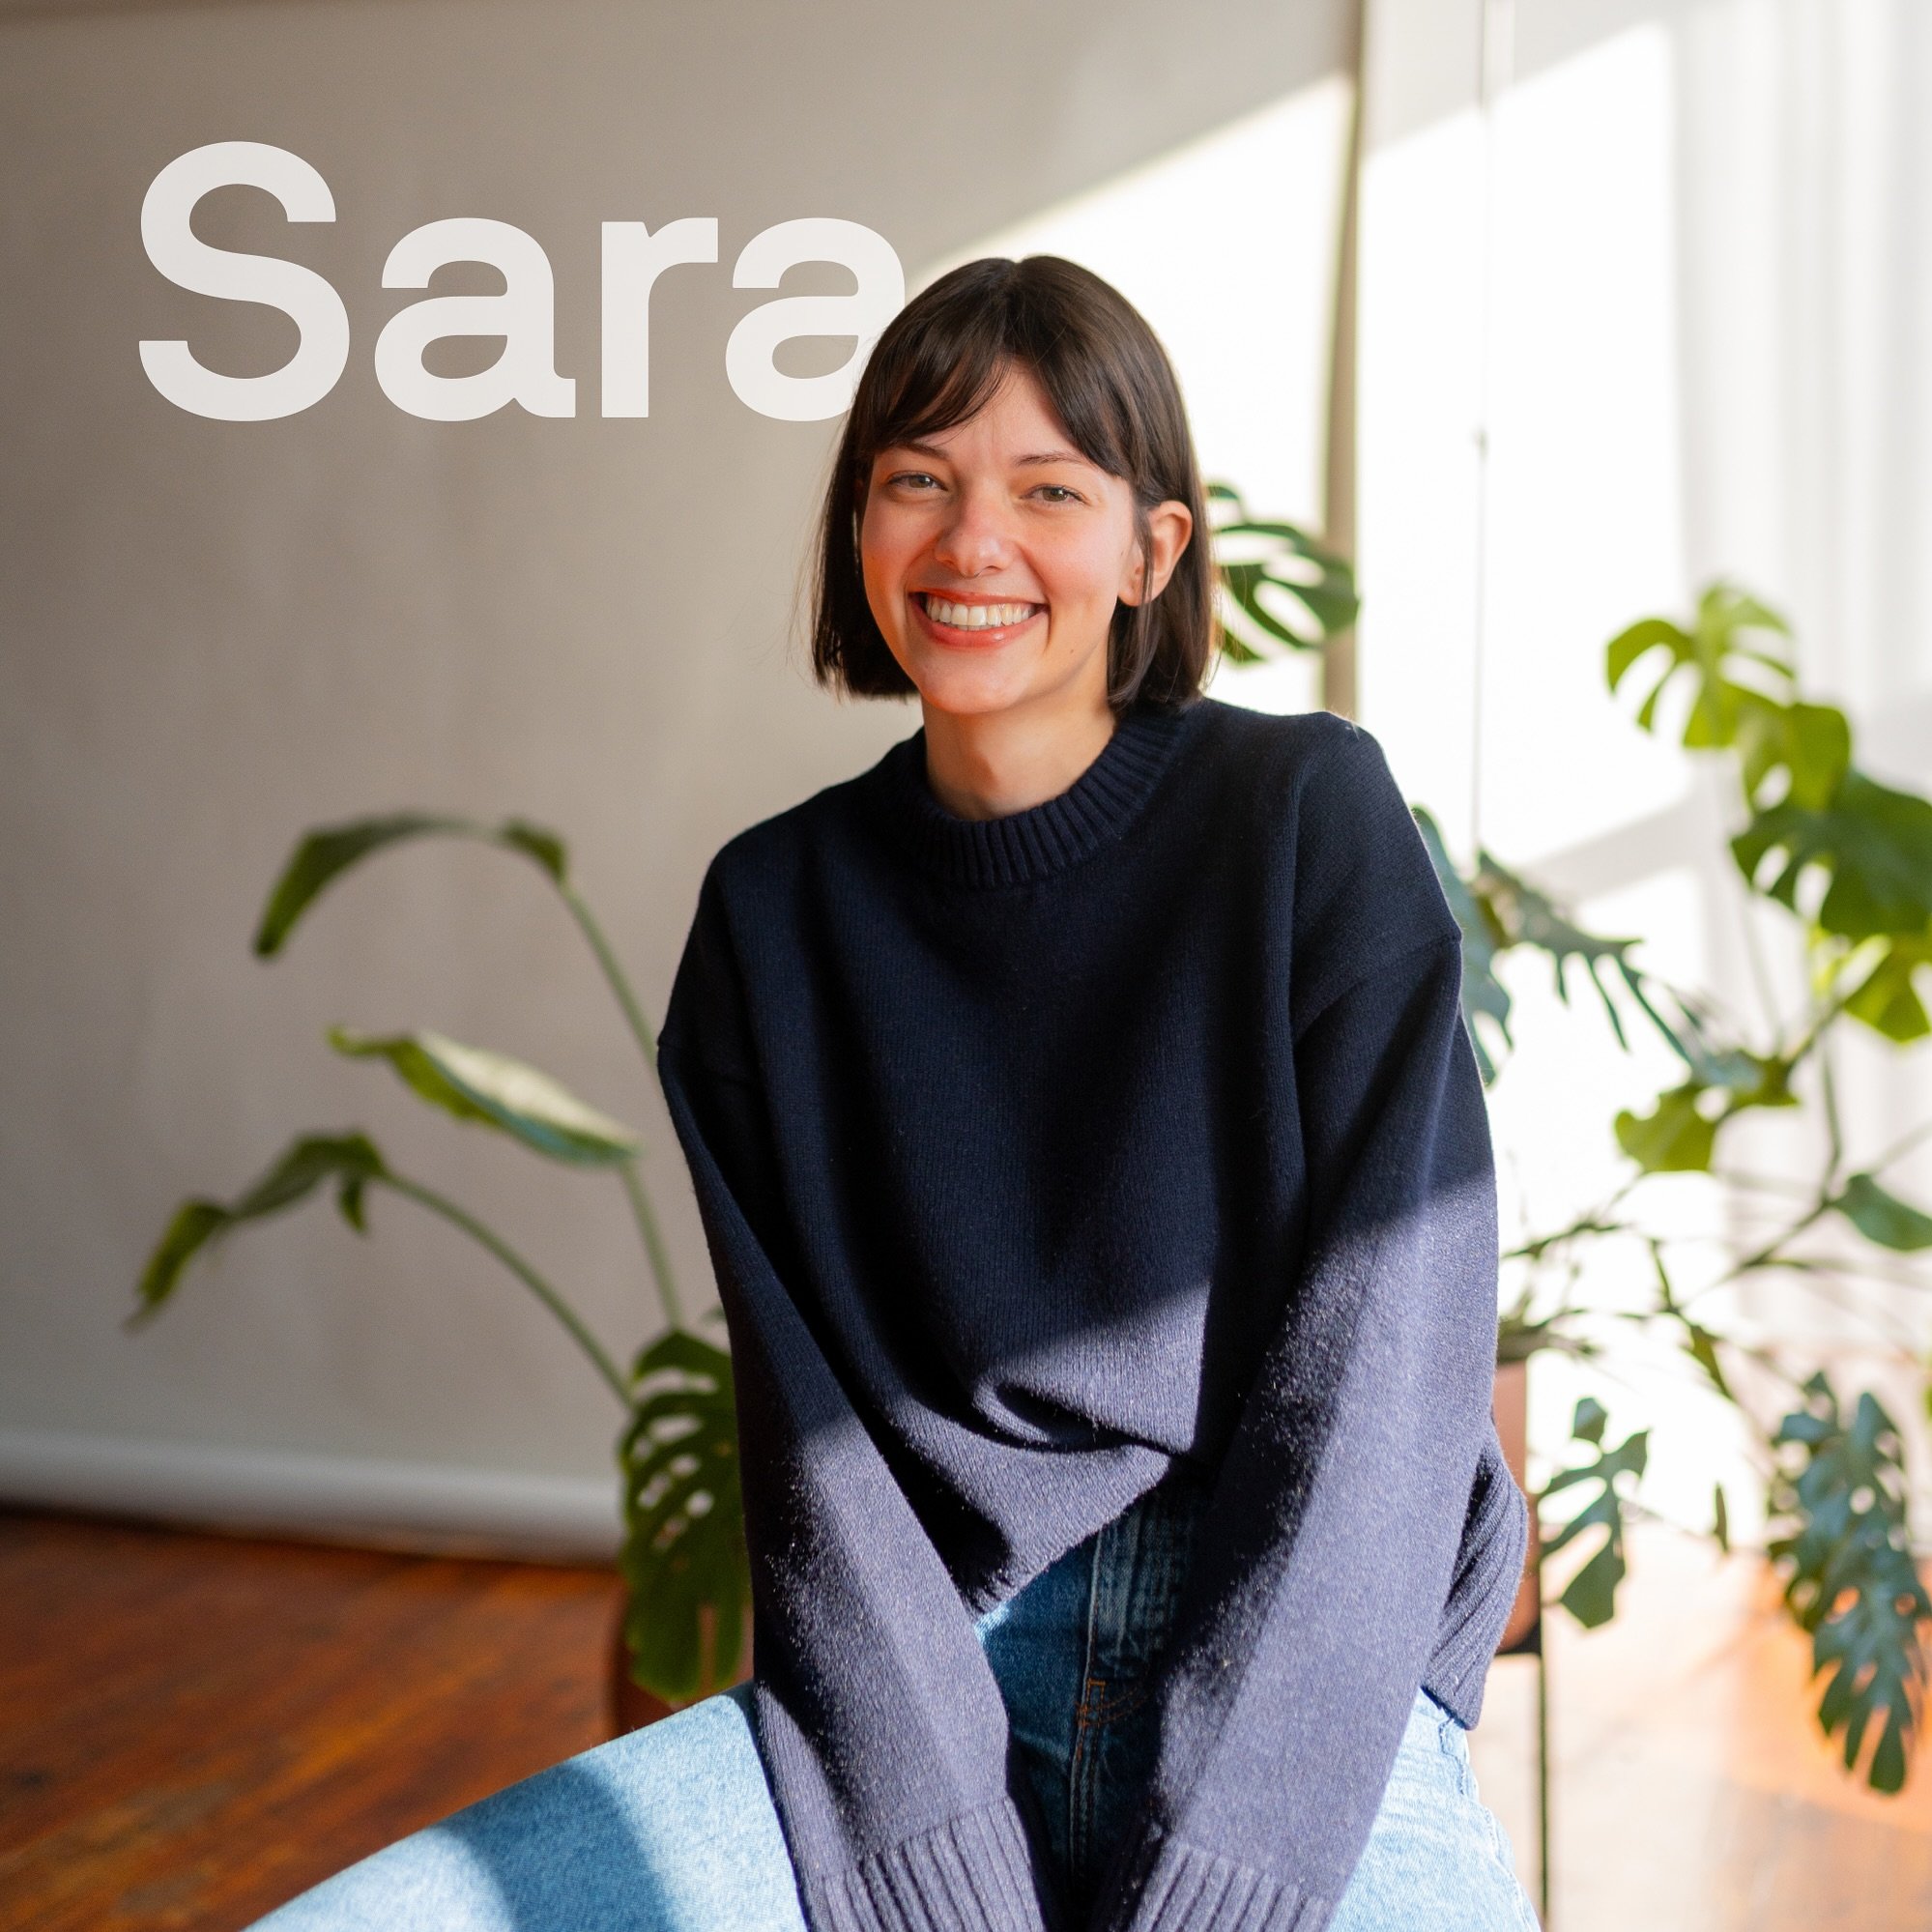 &ldquo;What I love about HRVST is our commitment to understanding each client. It&rsquo;s more than just design; it&rsquo;s about weaving stories and relationships.&rdquo; &ndash; Sara Blanes, Junior Graphic Designer